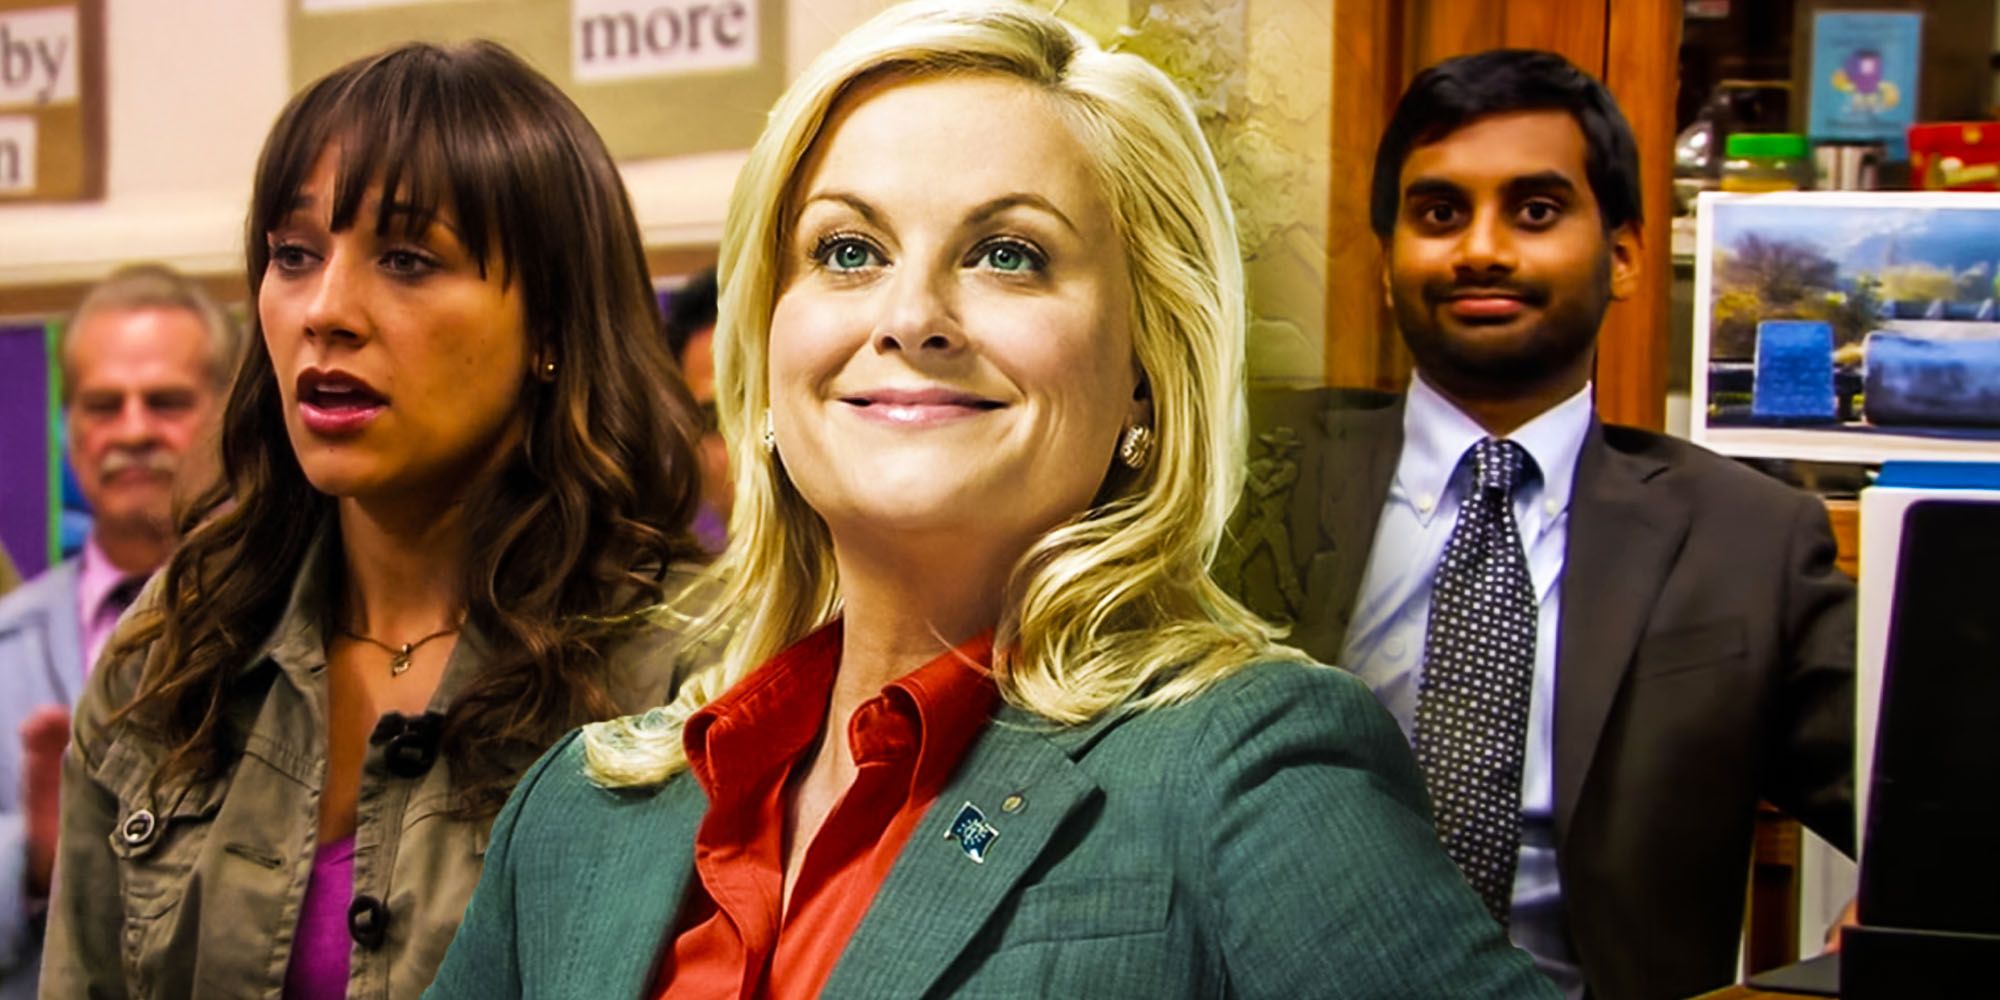 Parks and rec pilot episode shows lowest rated